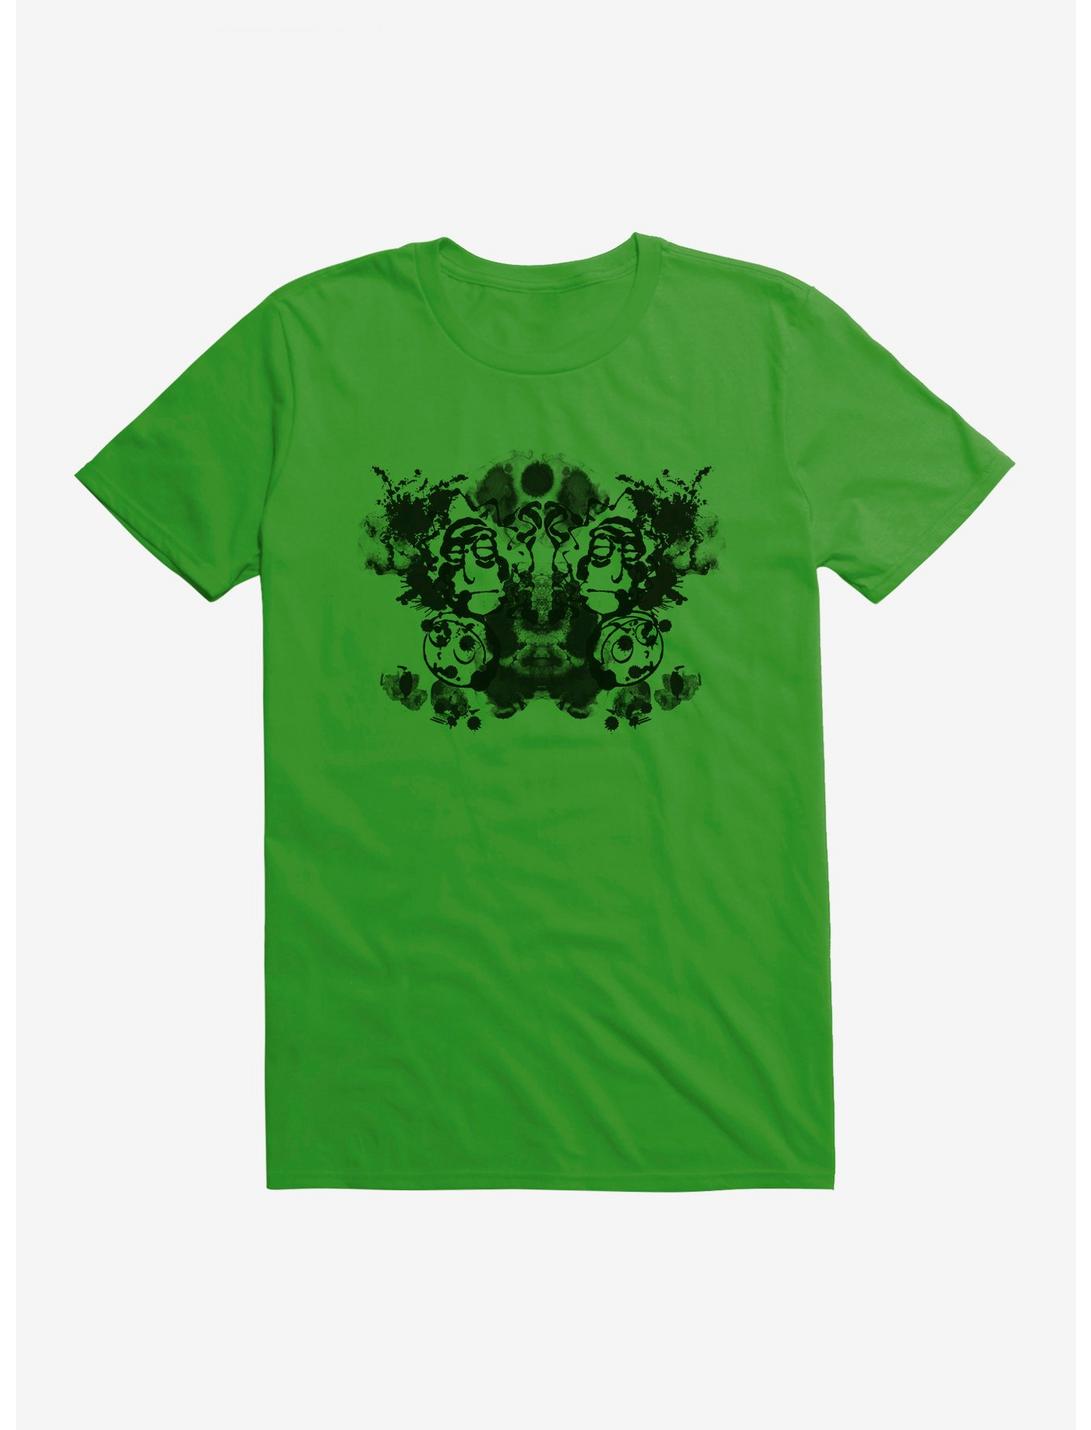 Rick And Morty Rorschach Test T-Shirt, GREEN APPLE, hi-res